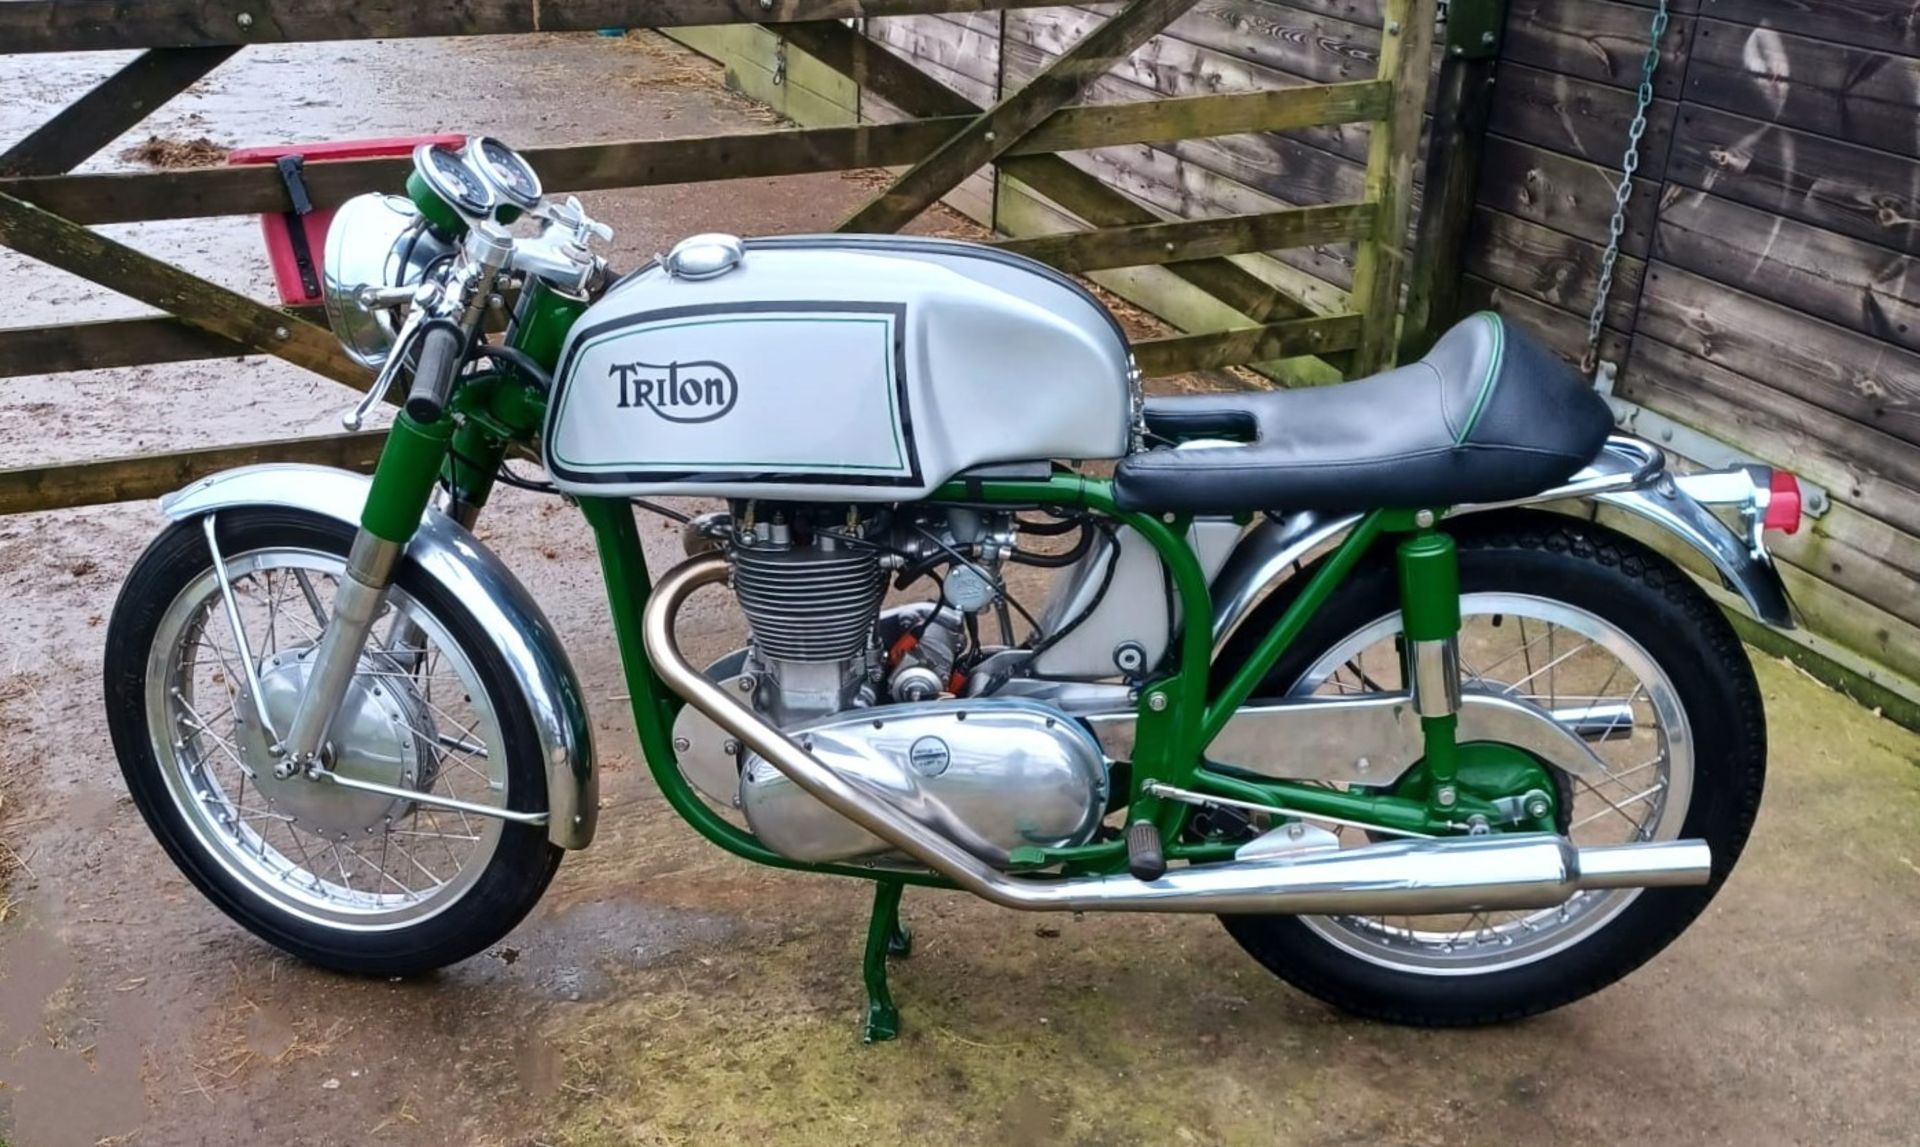 1958 TRITON 650cc Registration Number: 482 XVW Frame Number: TBA Recorded Mileage: 14 miles - - Image 2 of 16